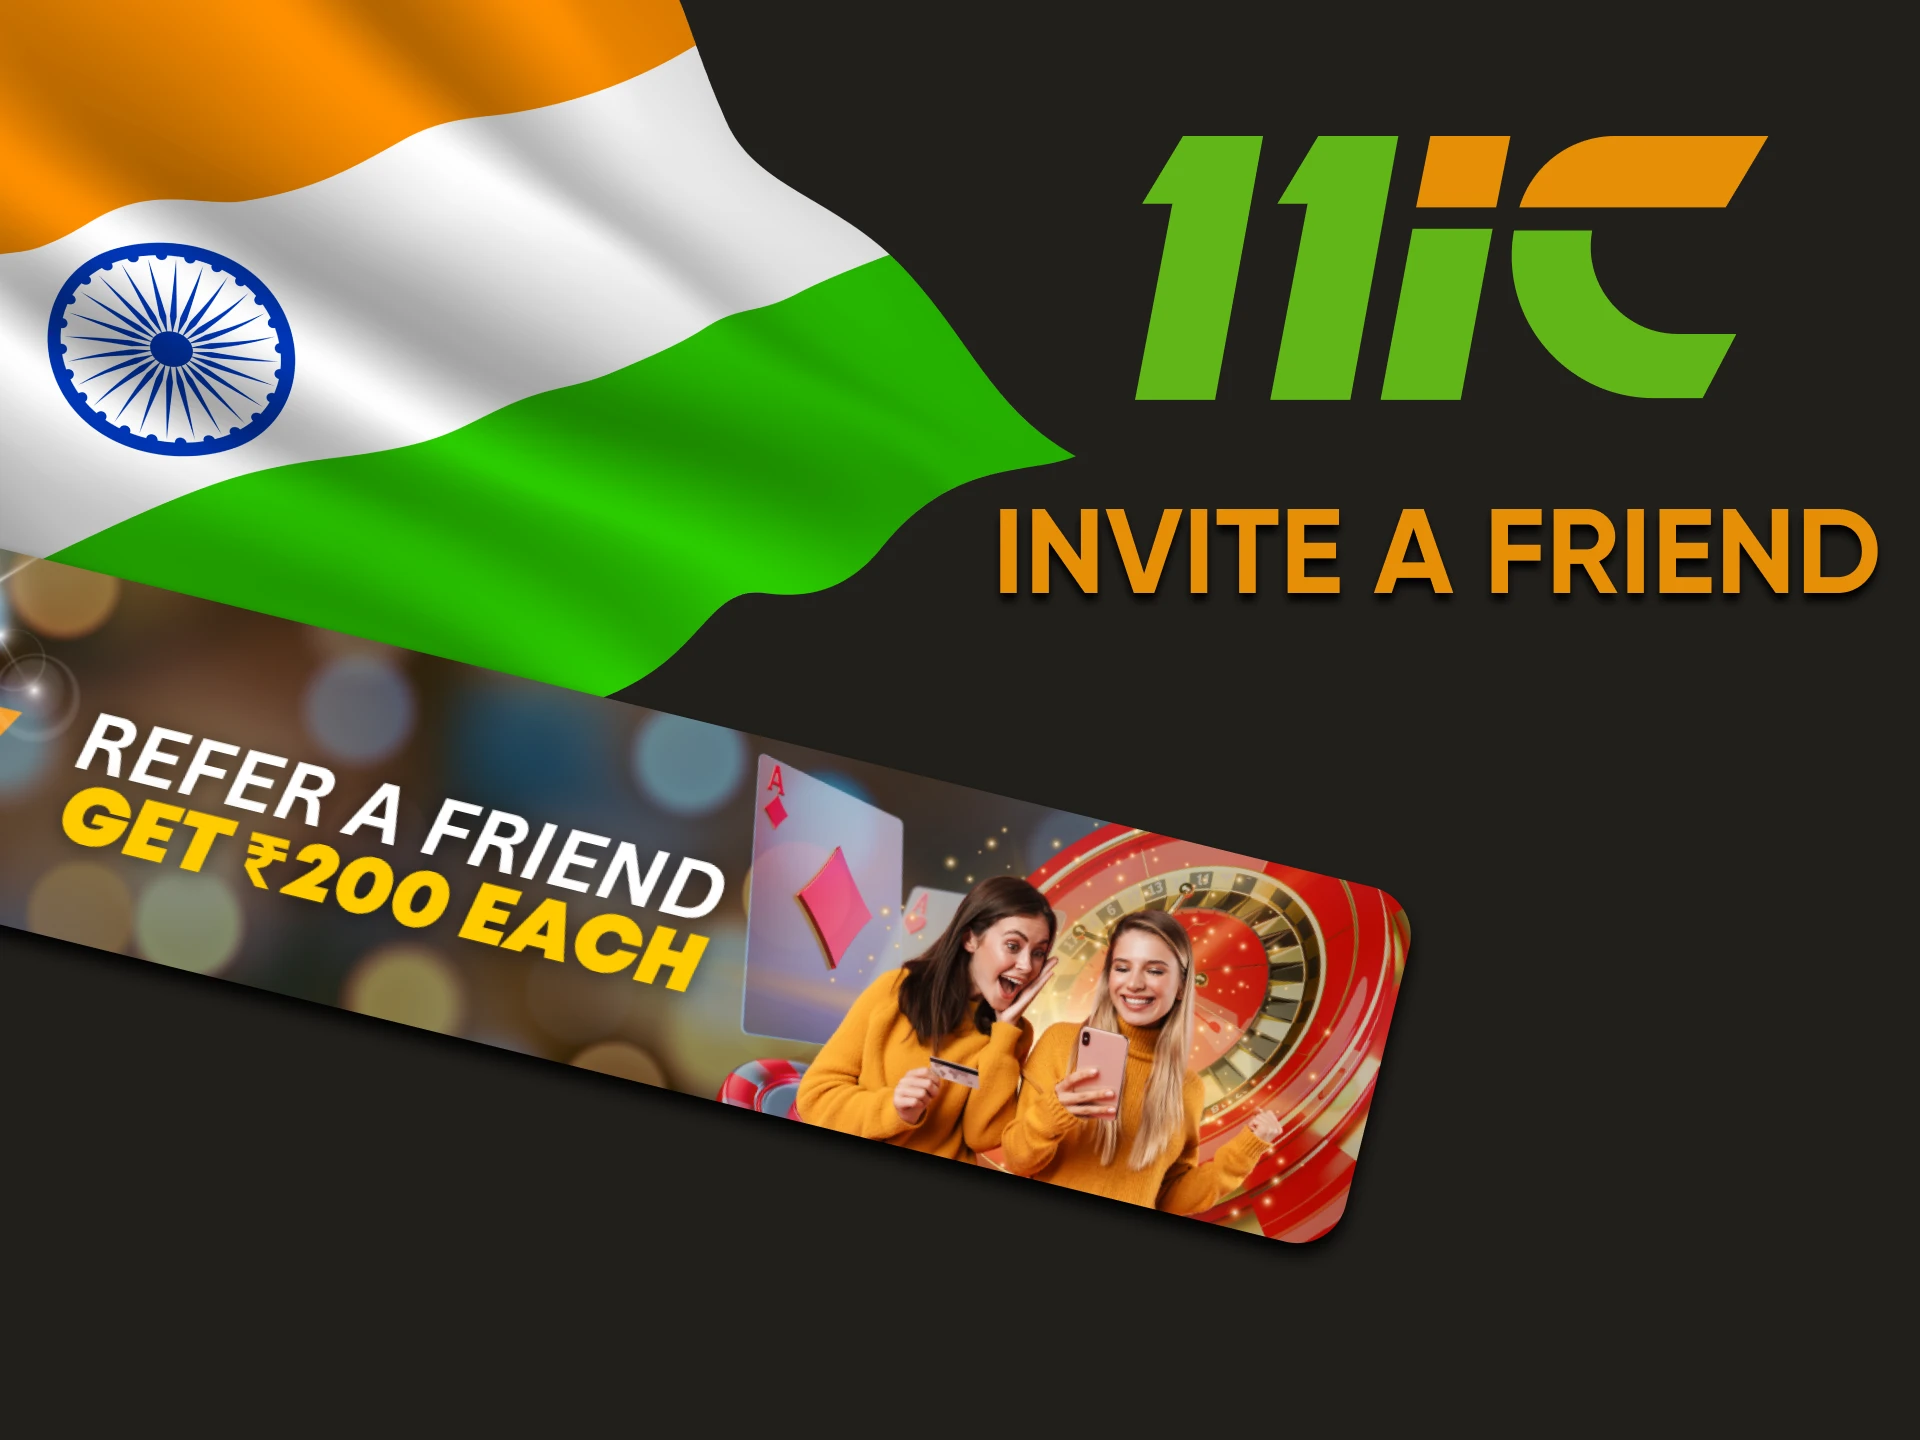 By inviting a friend you receive a bonus from 11ic.